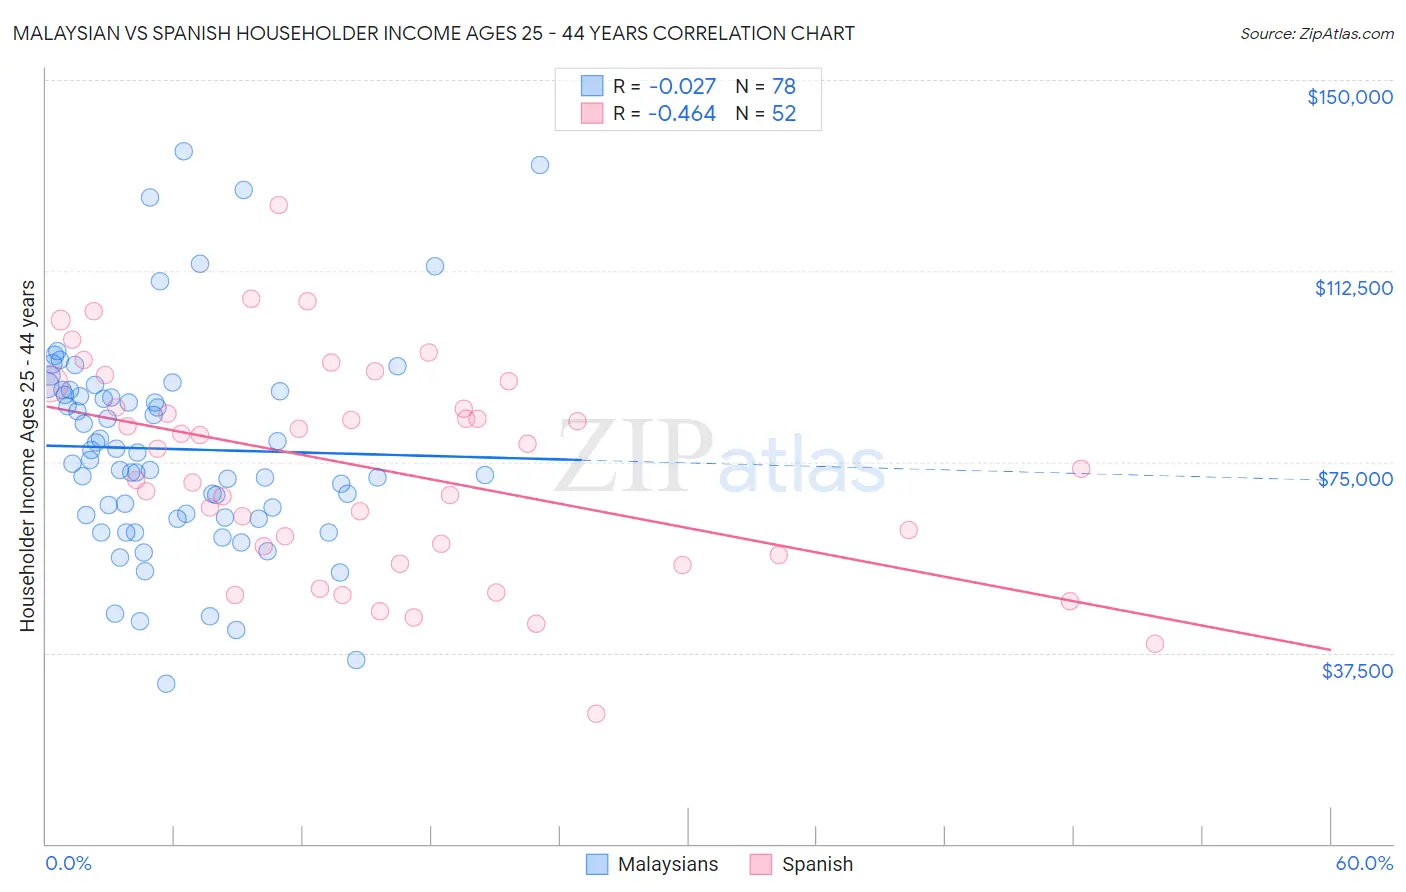 Malaysian vs Spanish Householder Income Ages 25 - 44 years